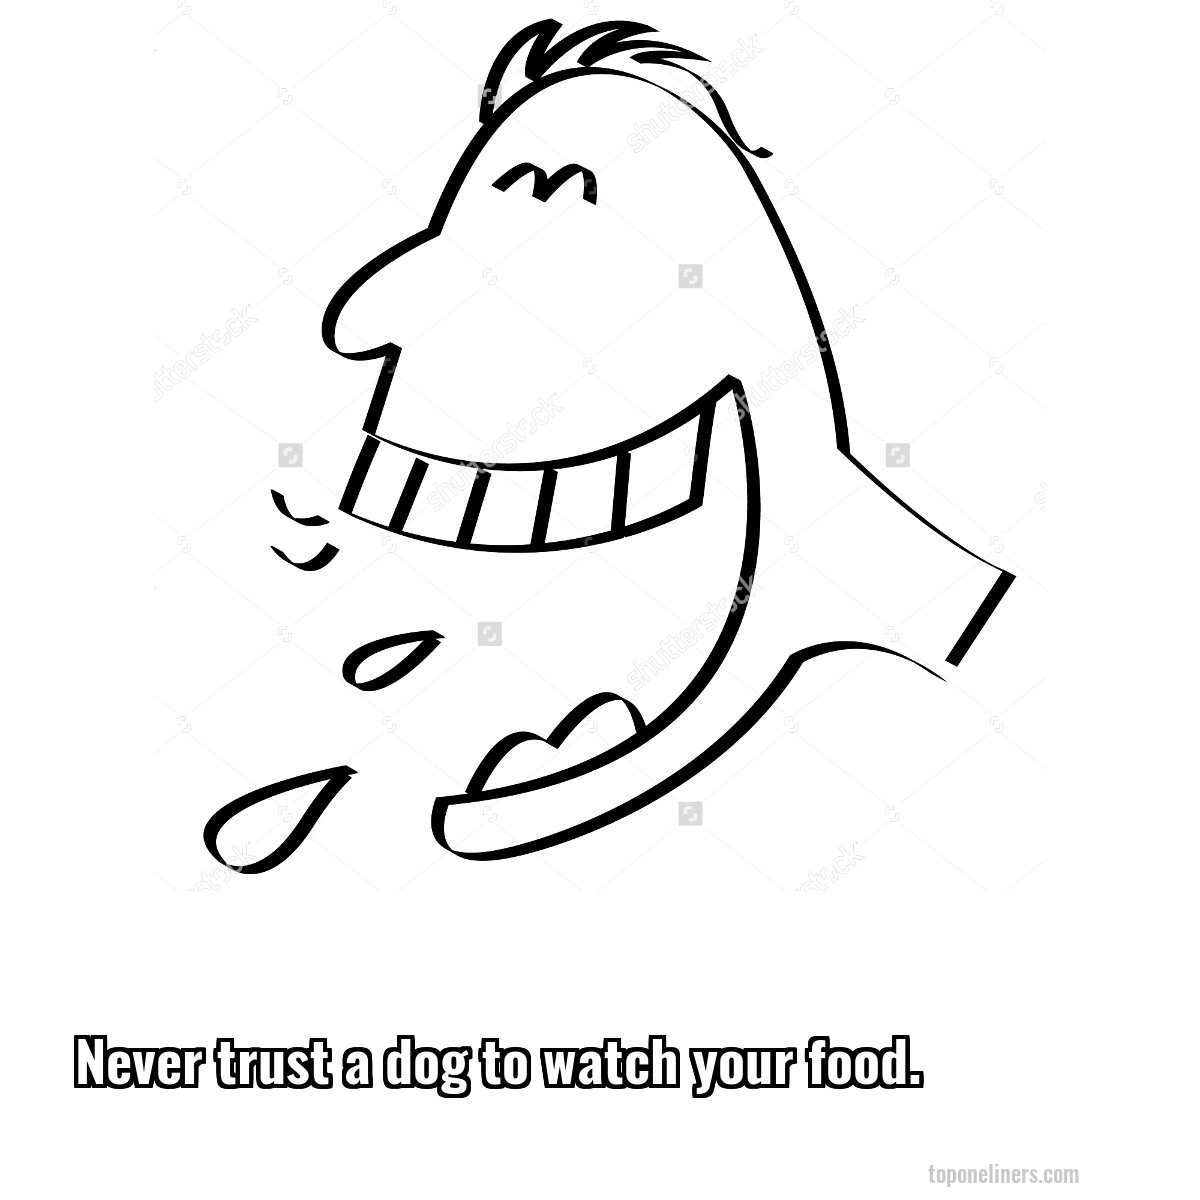 Never trust a dog to watch your food.